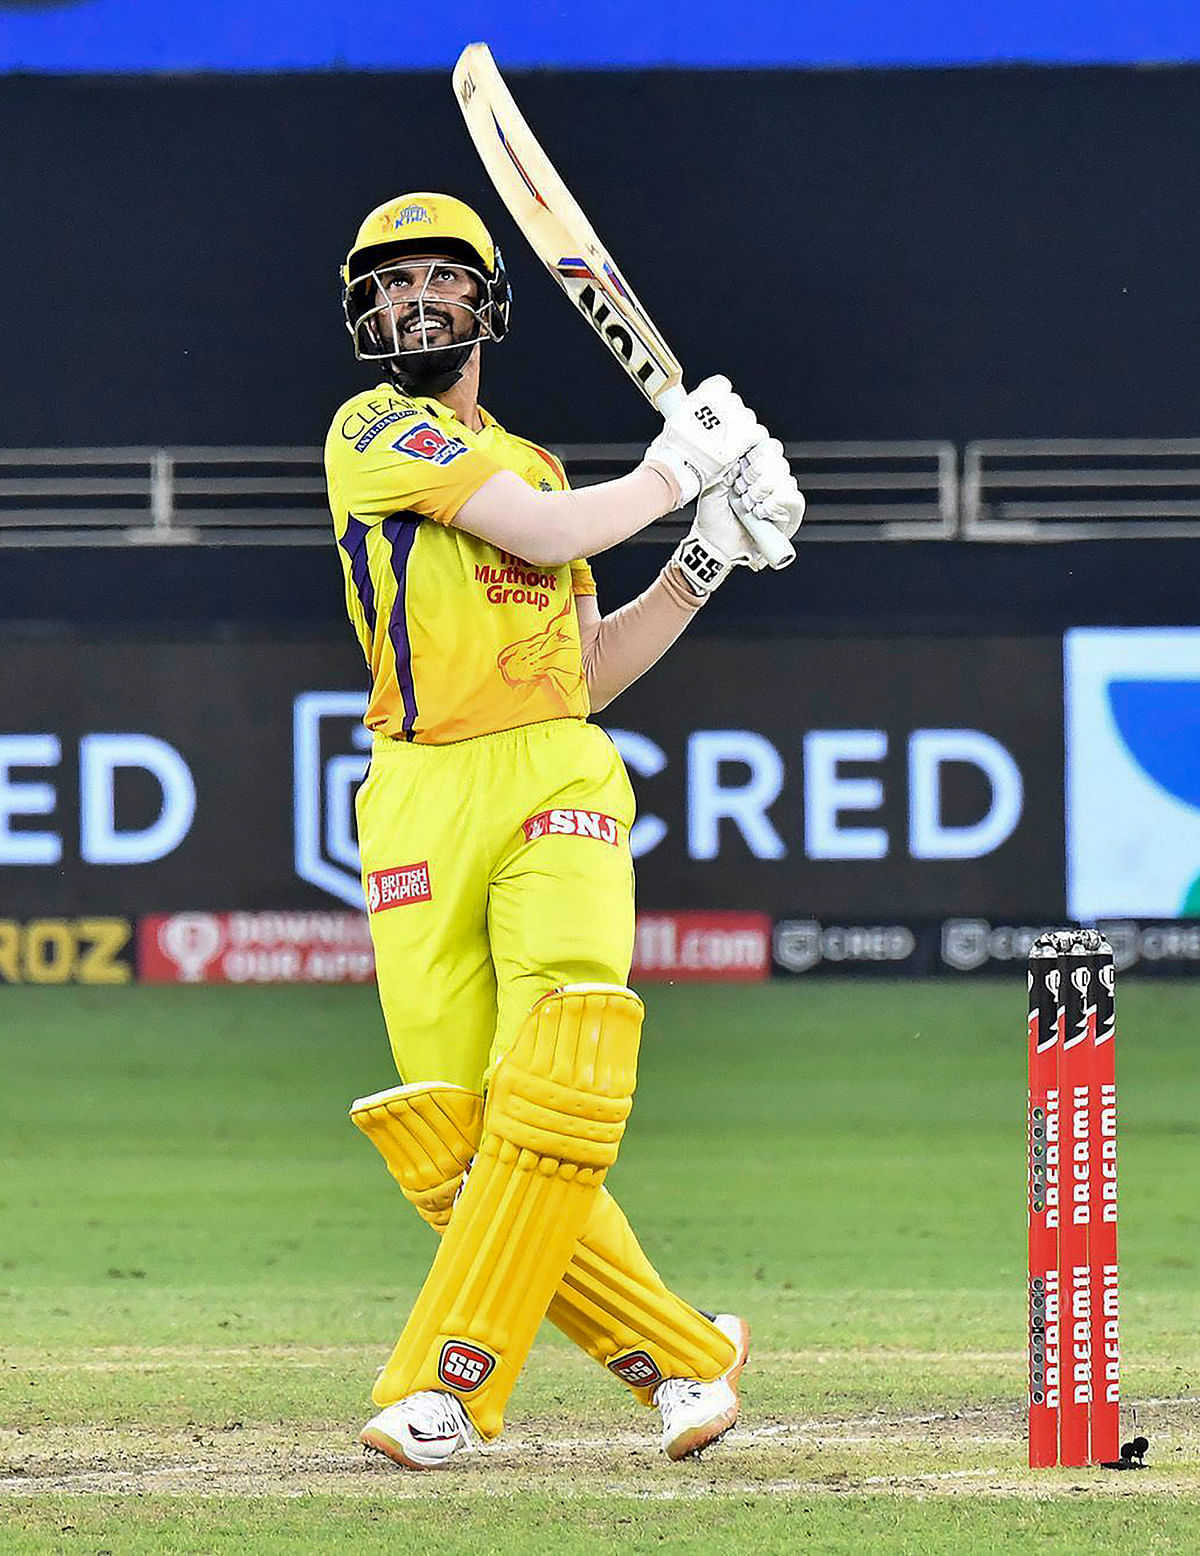 RUTURAJ GAIKWAD: Chennai Super Kings did do one thing right this season: clear the cobwebs to make way for the dasher from Pune. His first three games saw two noughts and a five, but the last three were sumptuous - 65*, 72 and 62* to end the season on 204 runs at an average of 51.